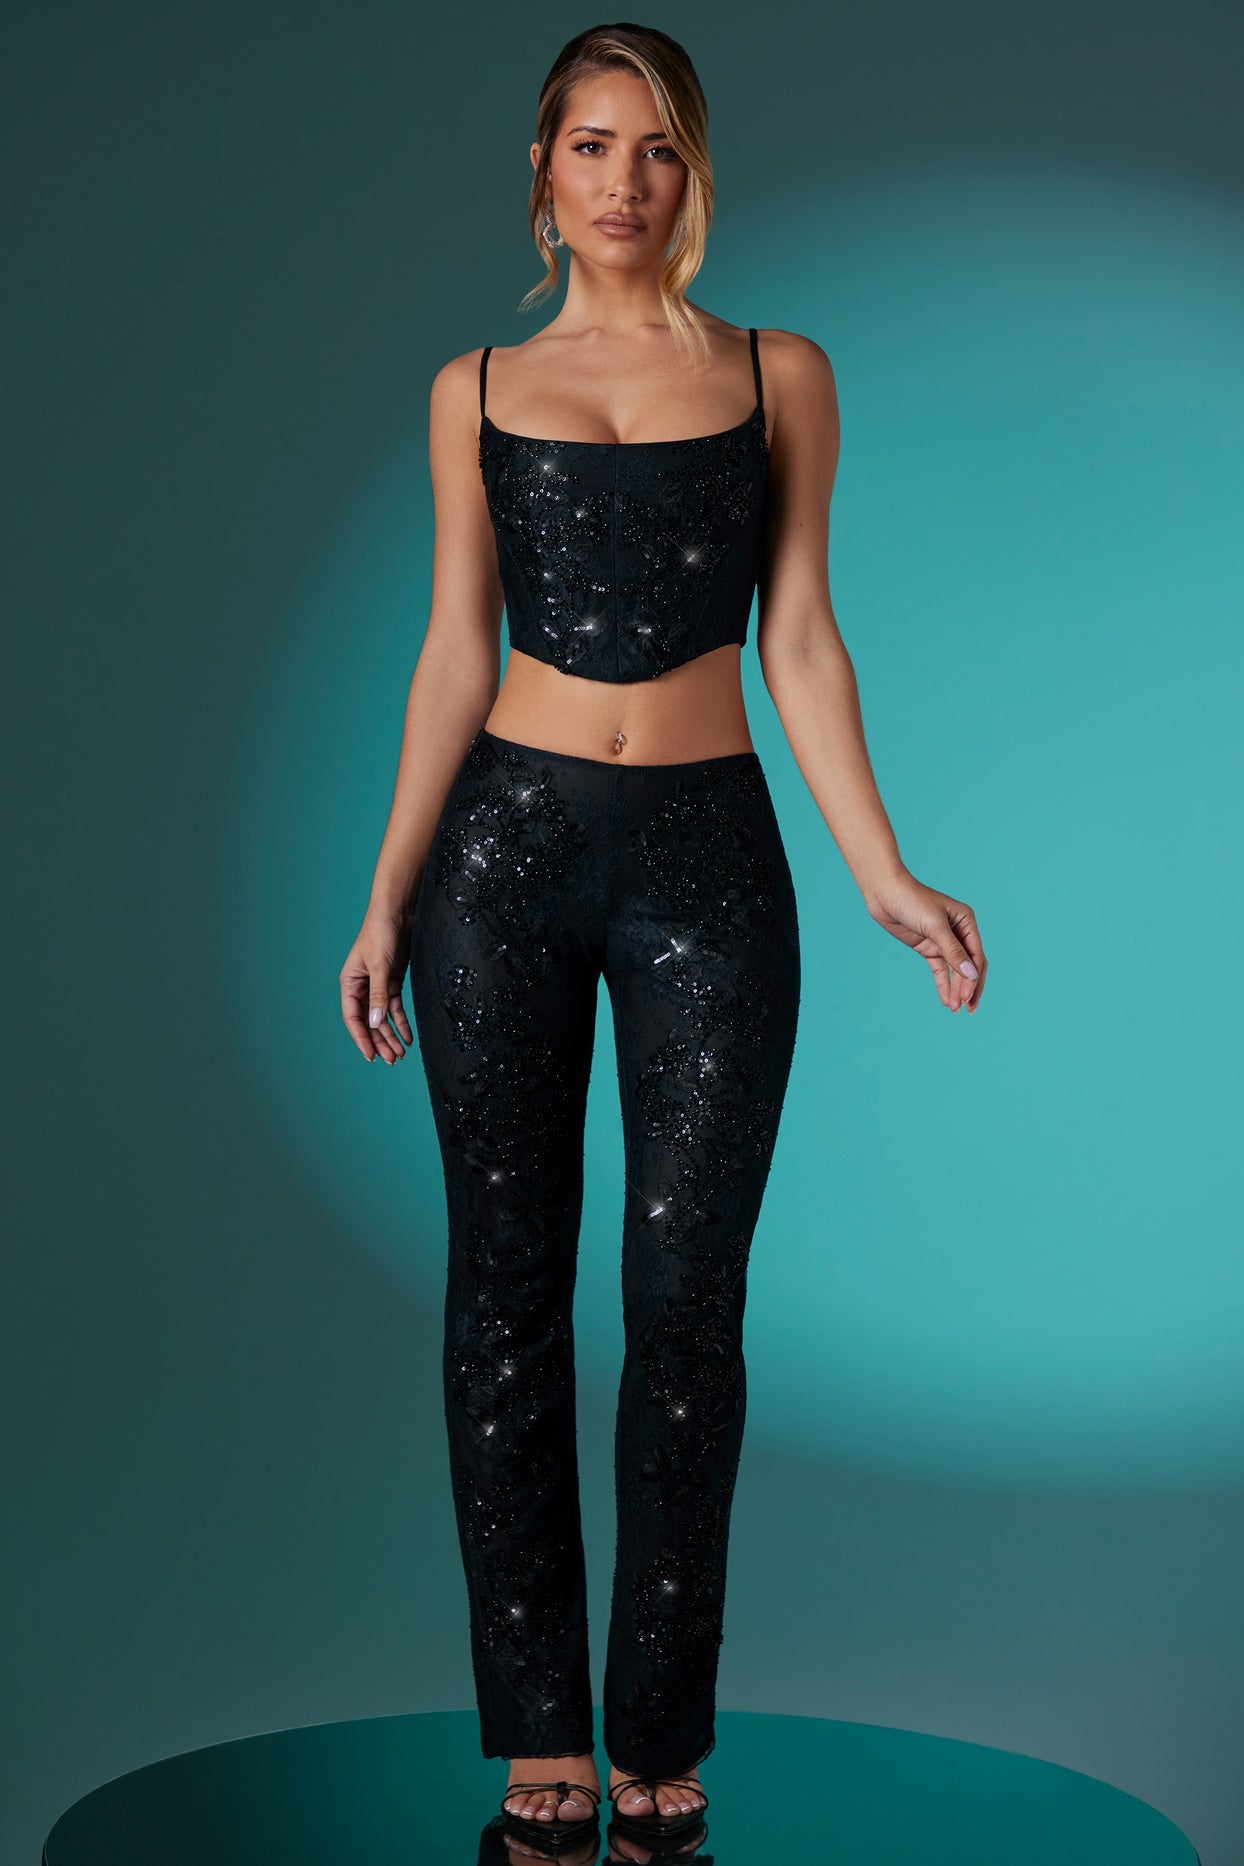 Embellished Lace Corset Crop Top in Black